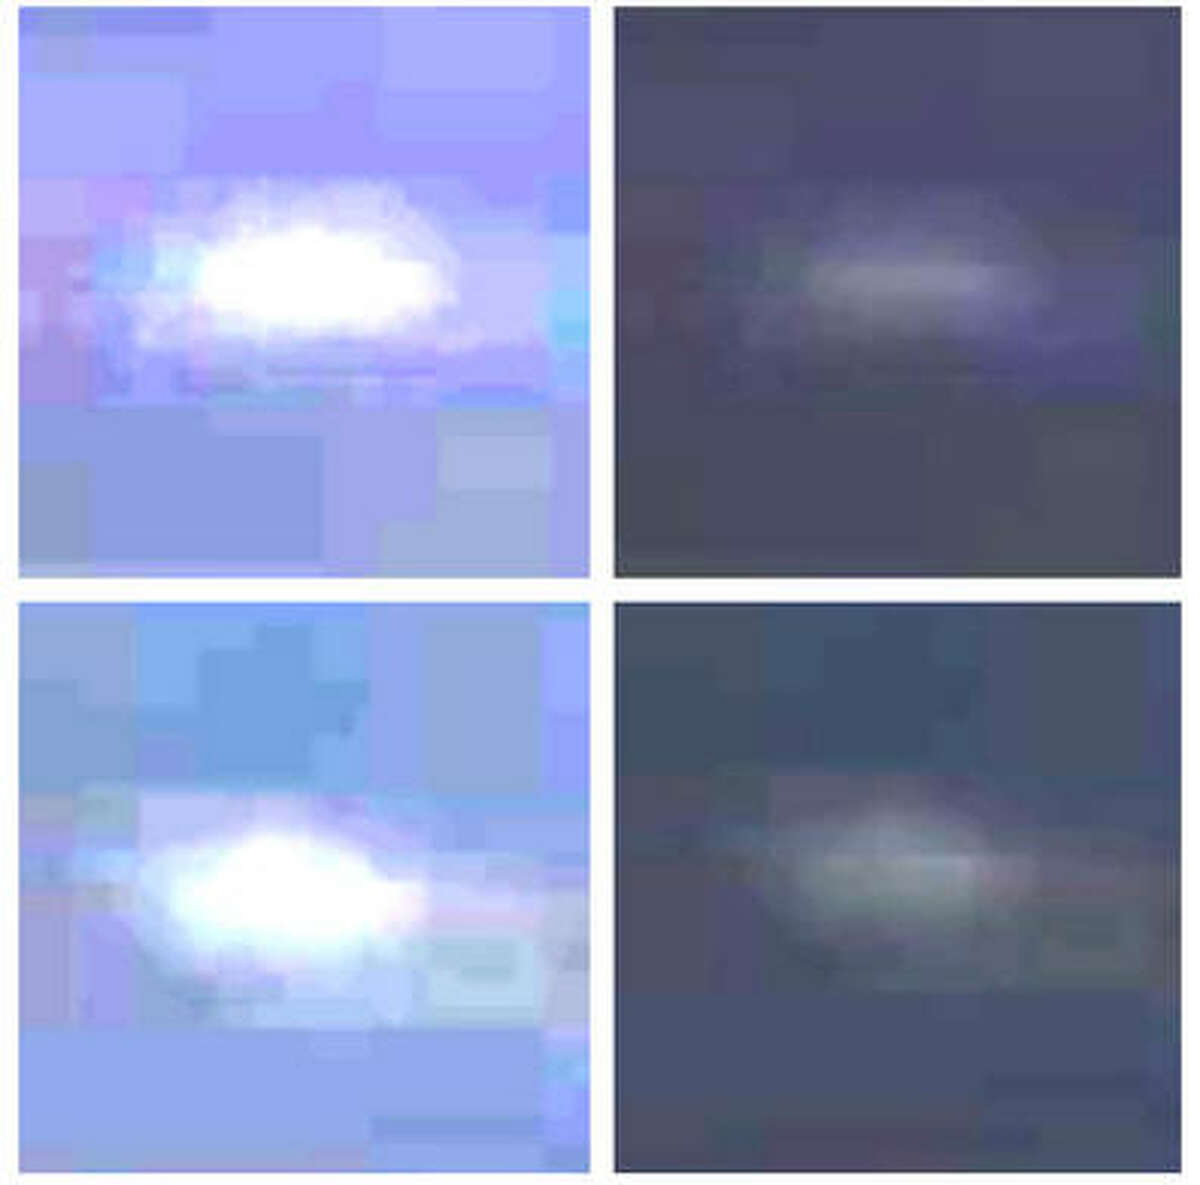 These enlargements of screen shots from NASA's live webcam purportedly show a UFO that approached the International Space Station Aug. 4, 2014. (Photo: UFO Sightings Daily via NASA)